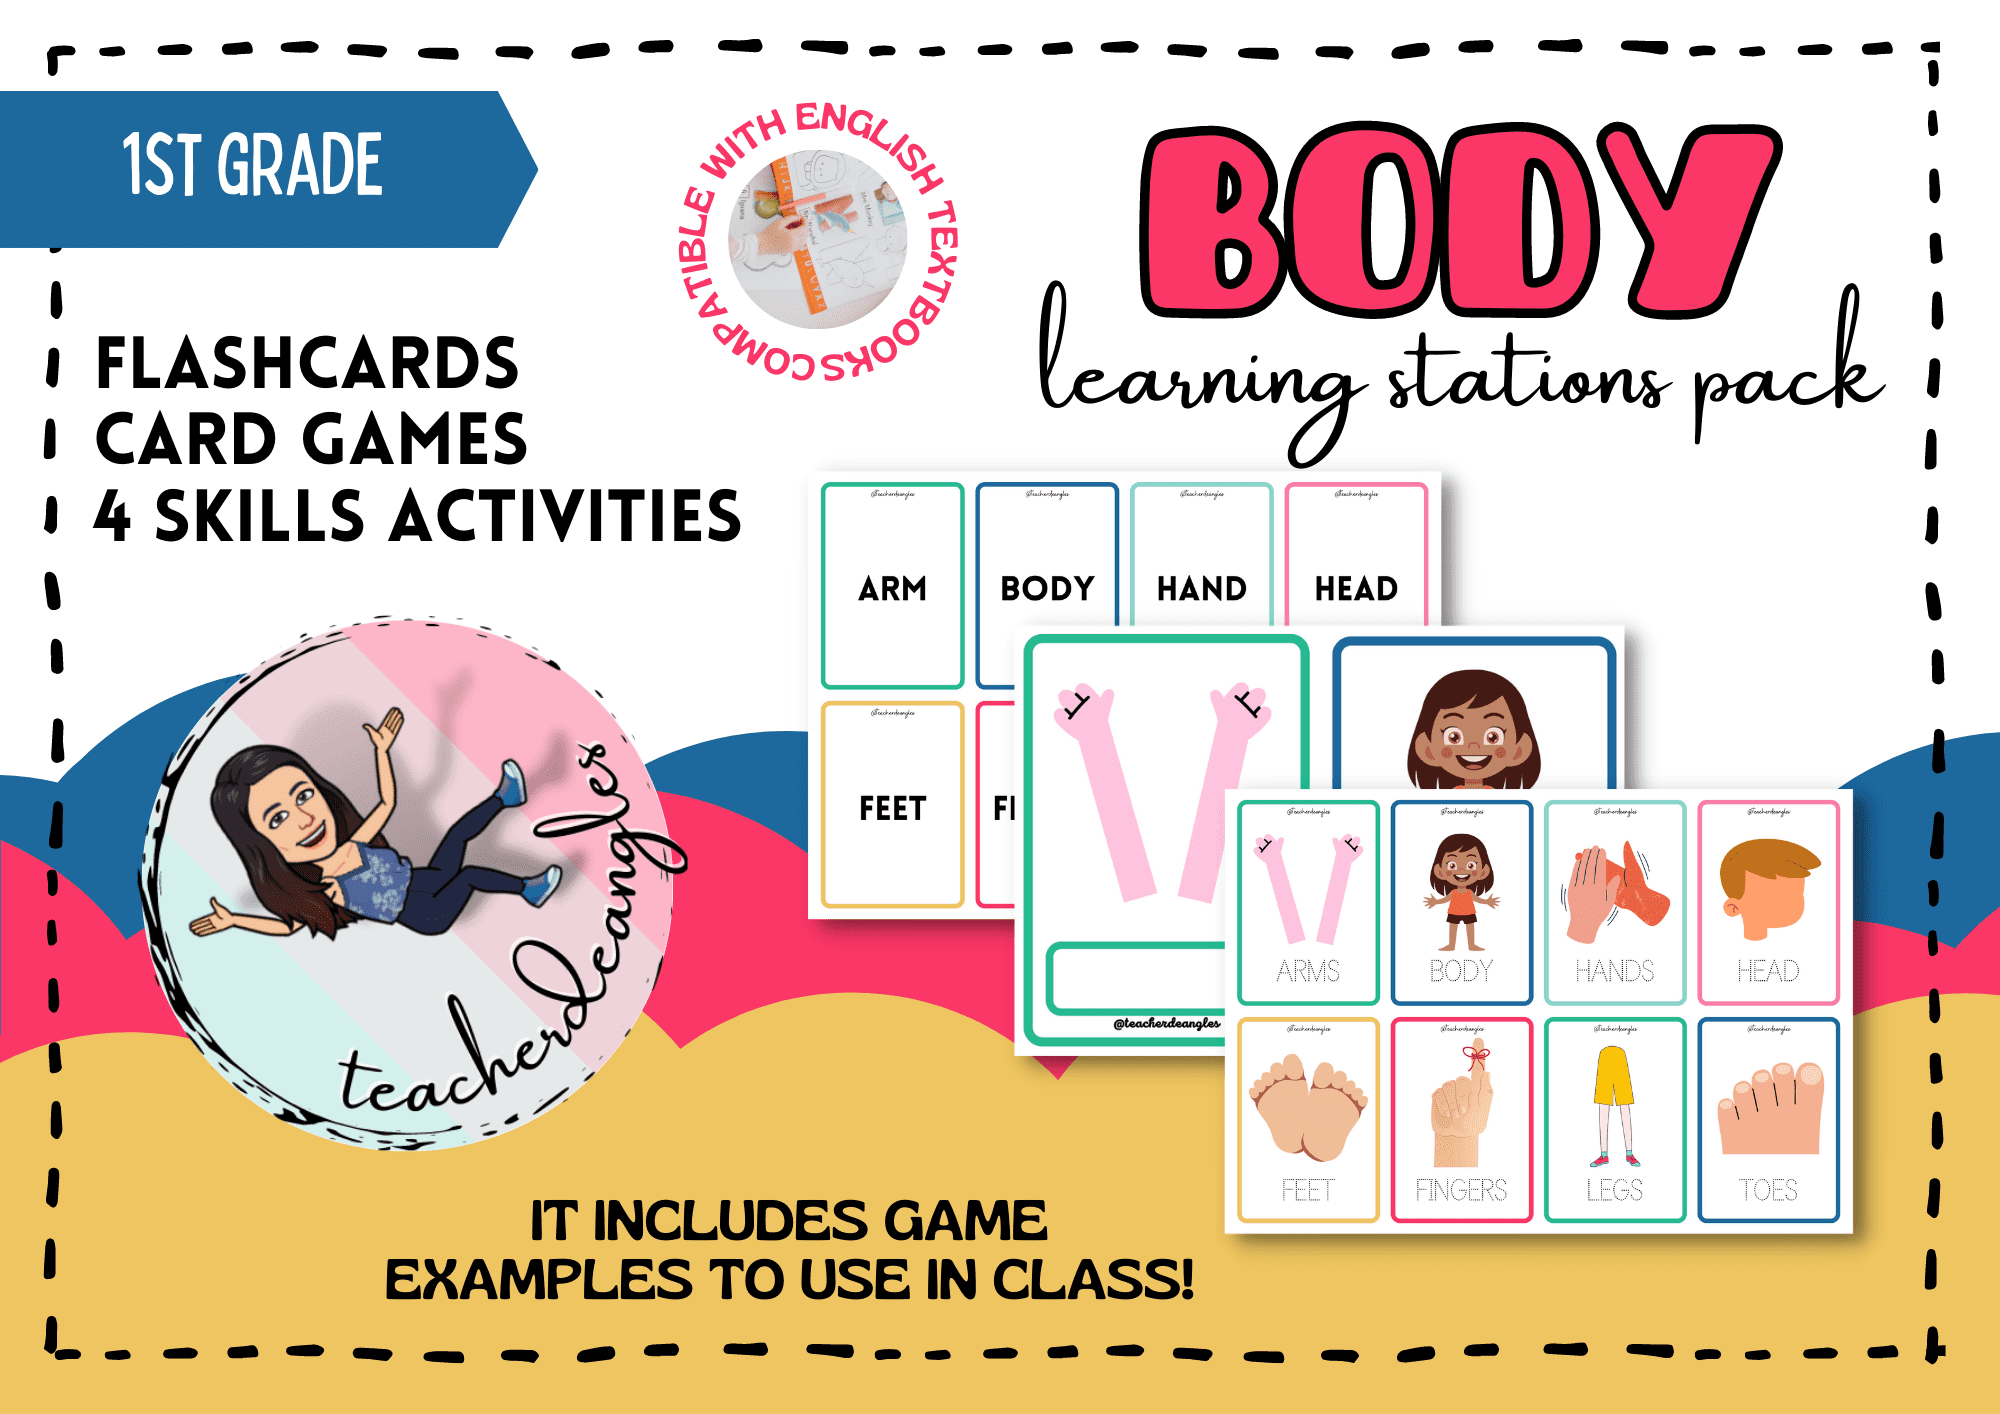 BODY PARTS LEARNING STATIONS PACK